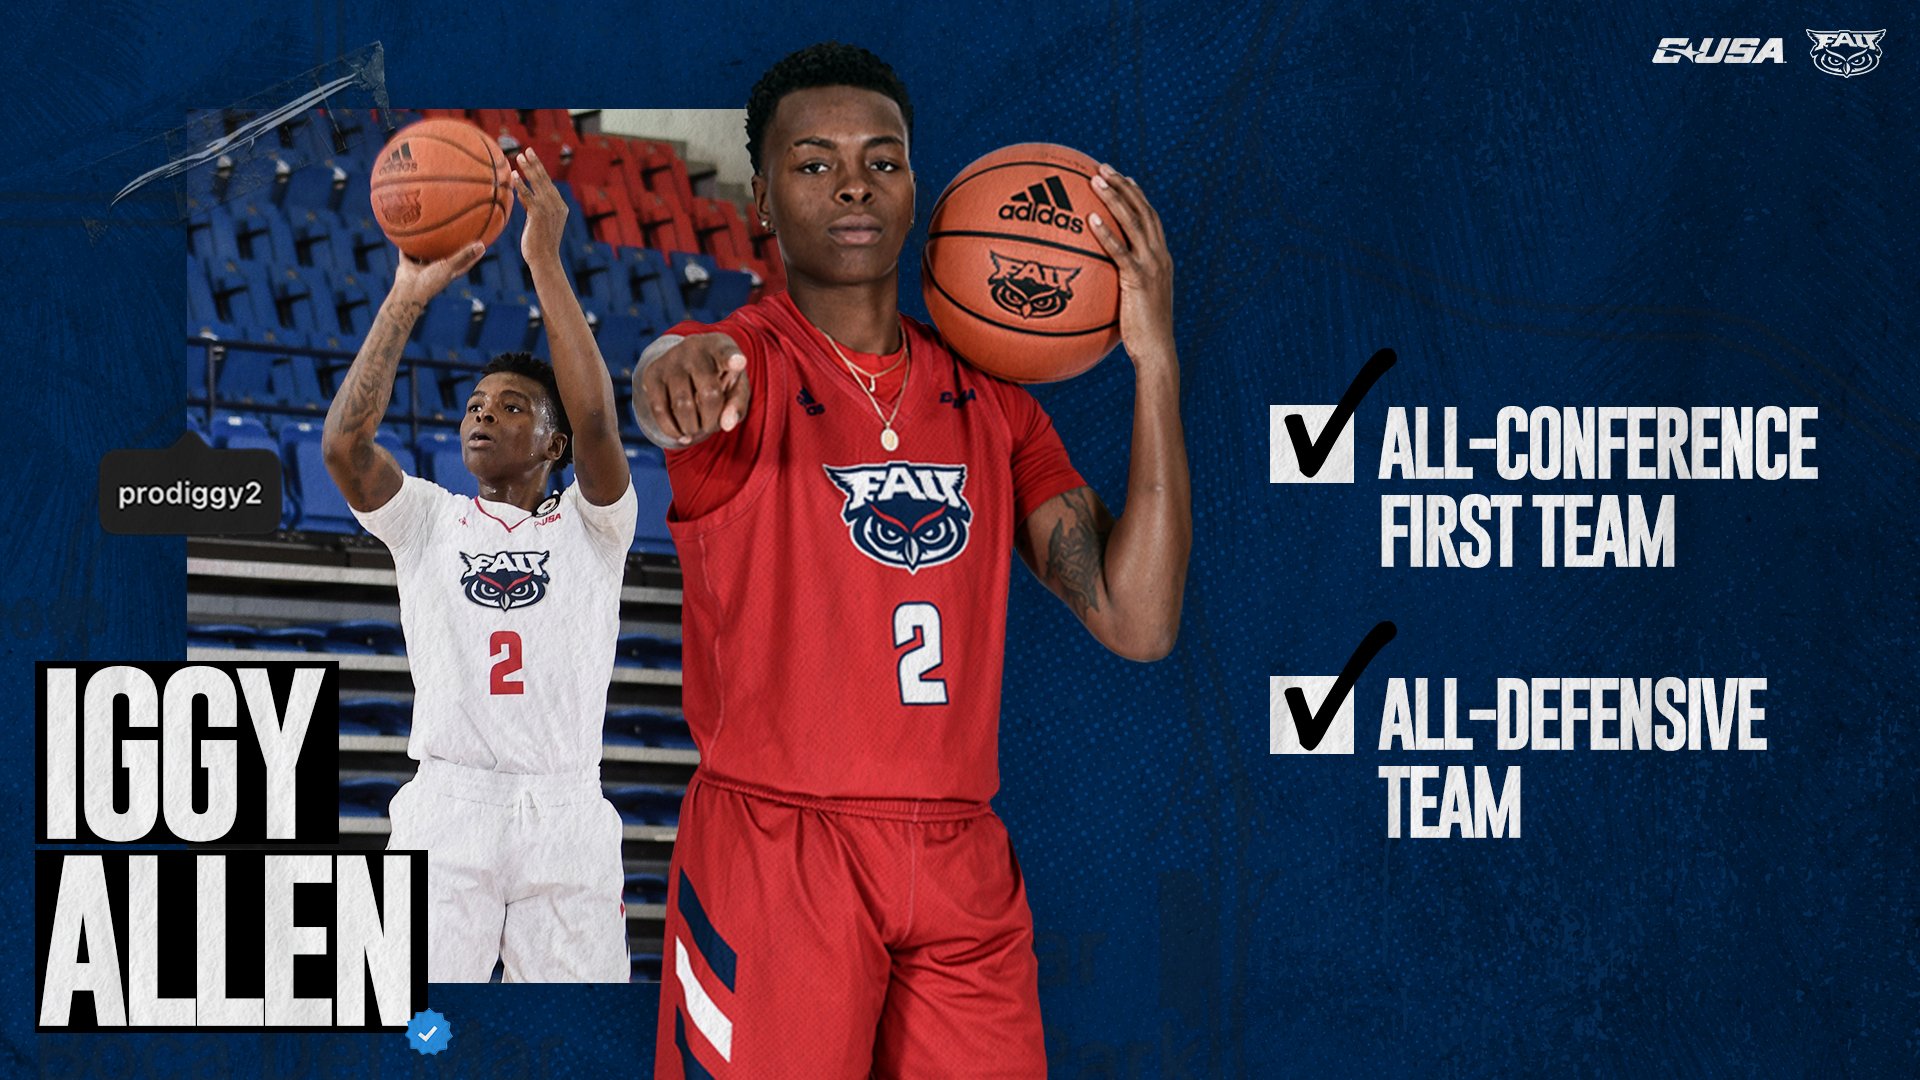 Allen Named to All-C-USA All-Conference First Team and All-Defensive Team